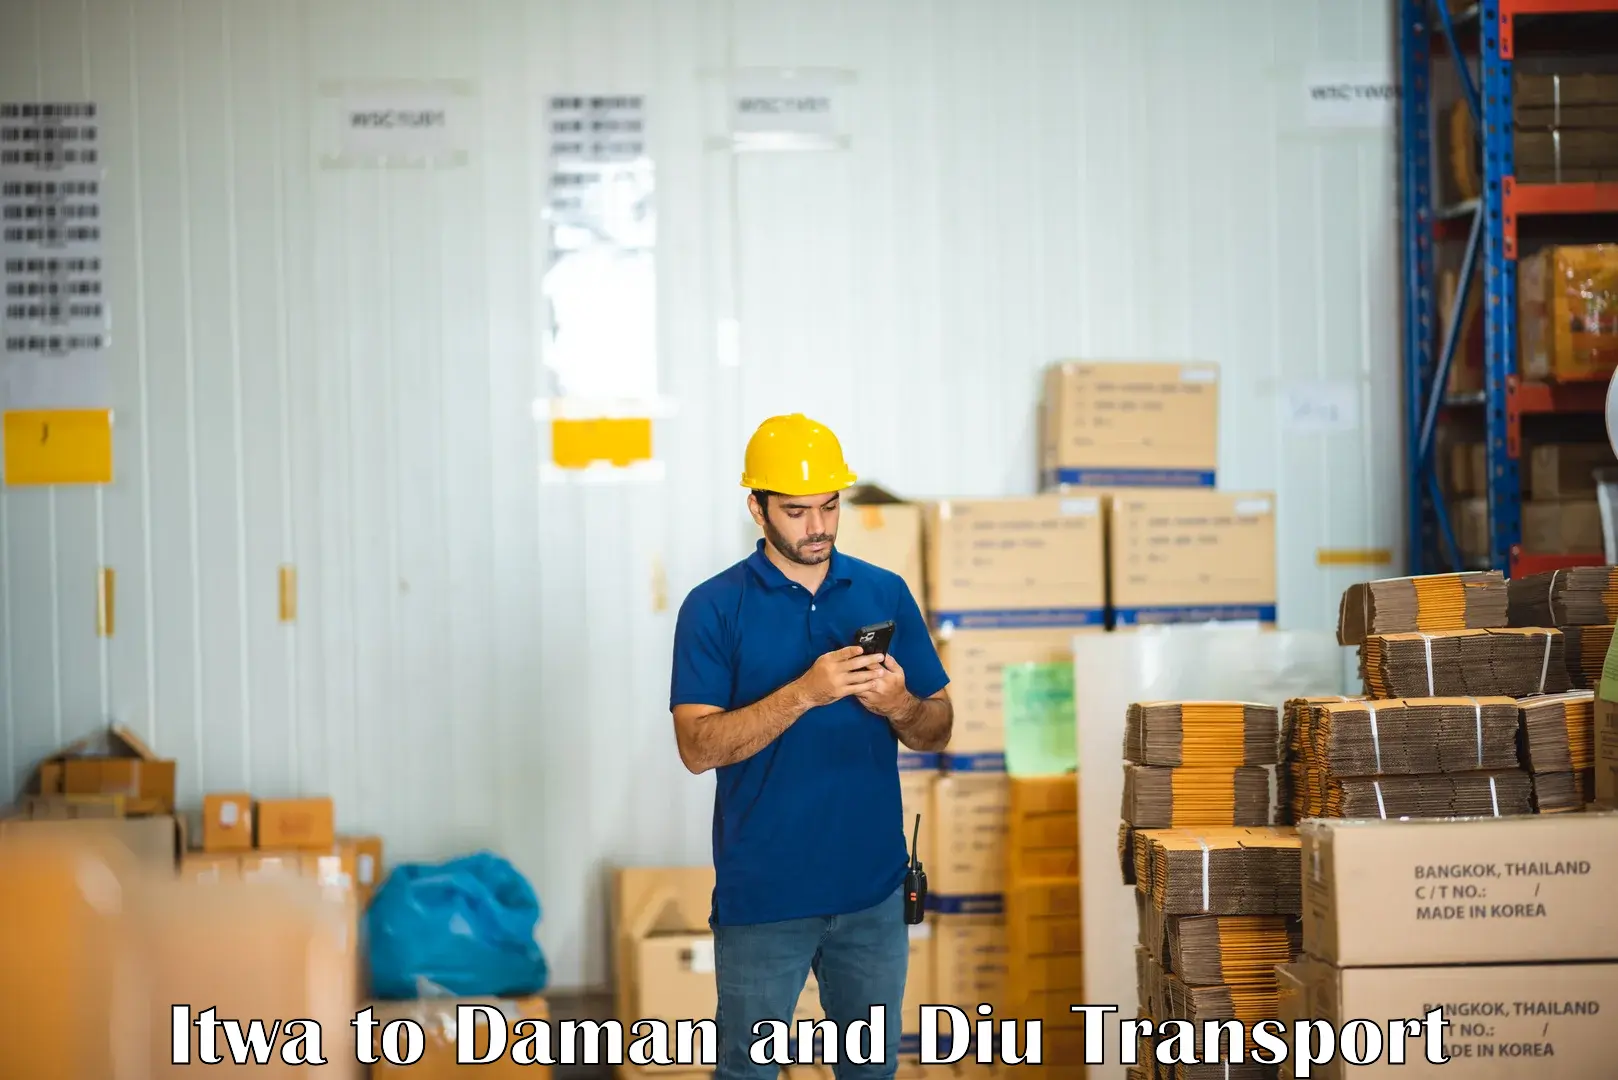 Transportation solution services Itwa to Daman and Diu